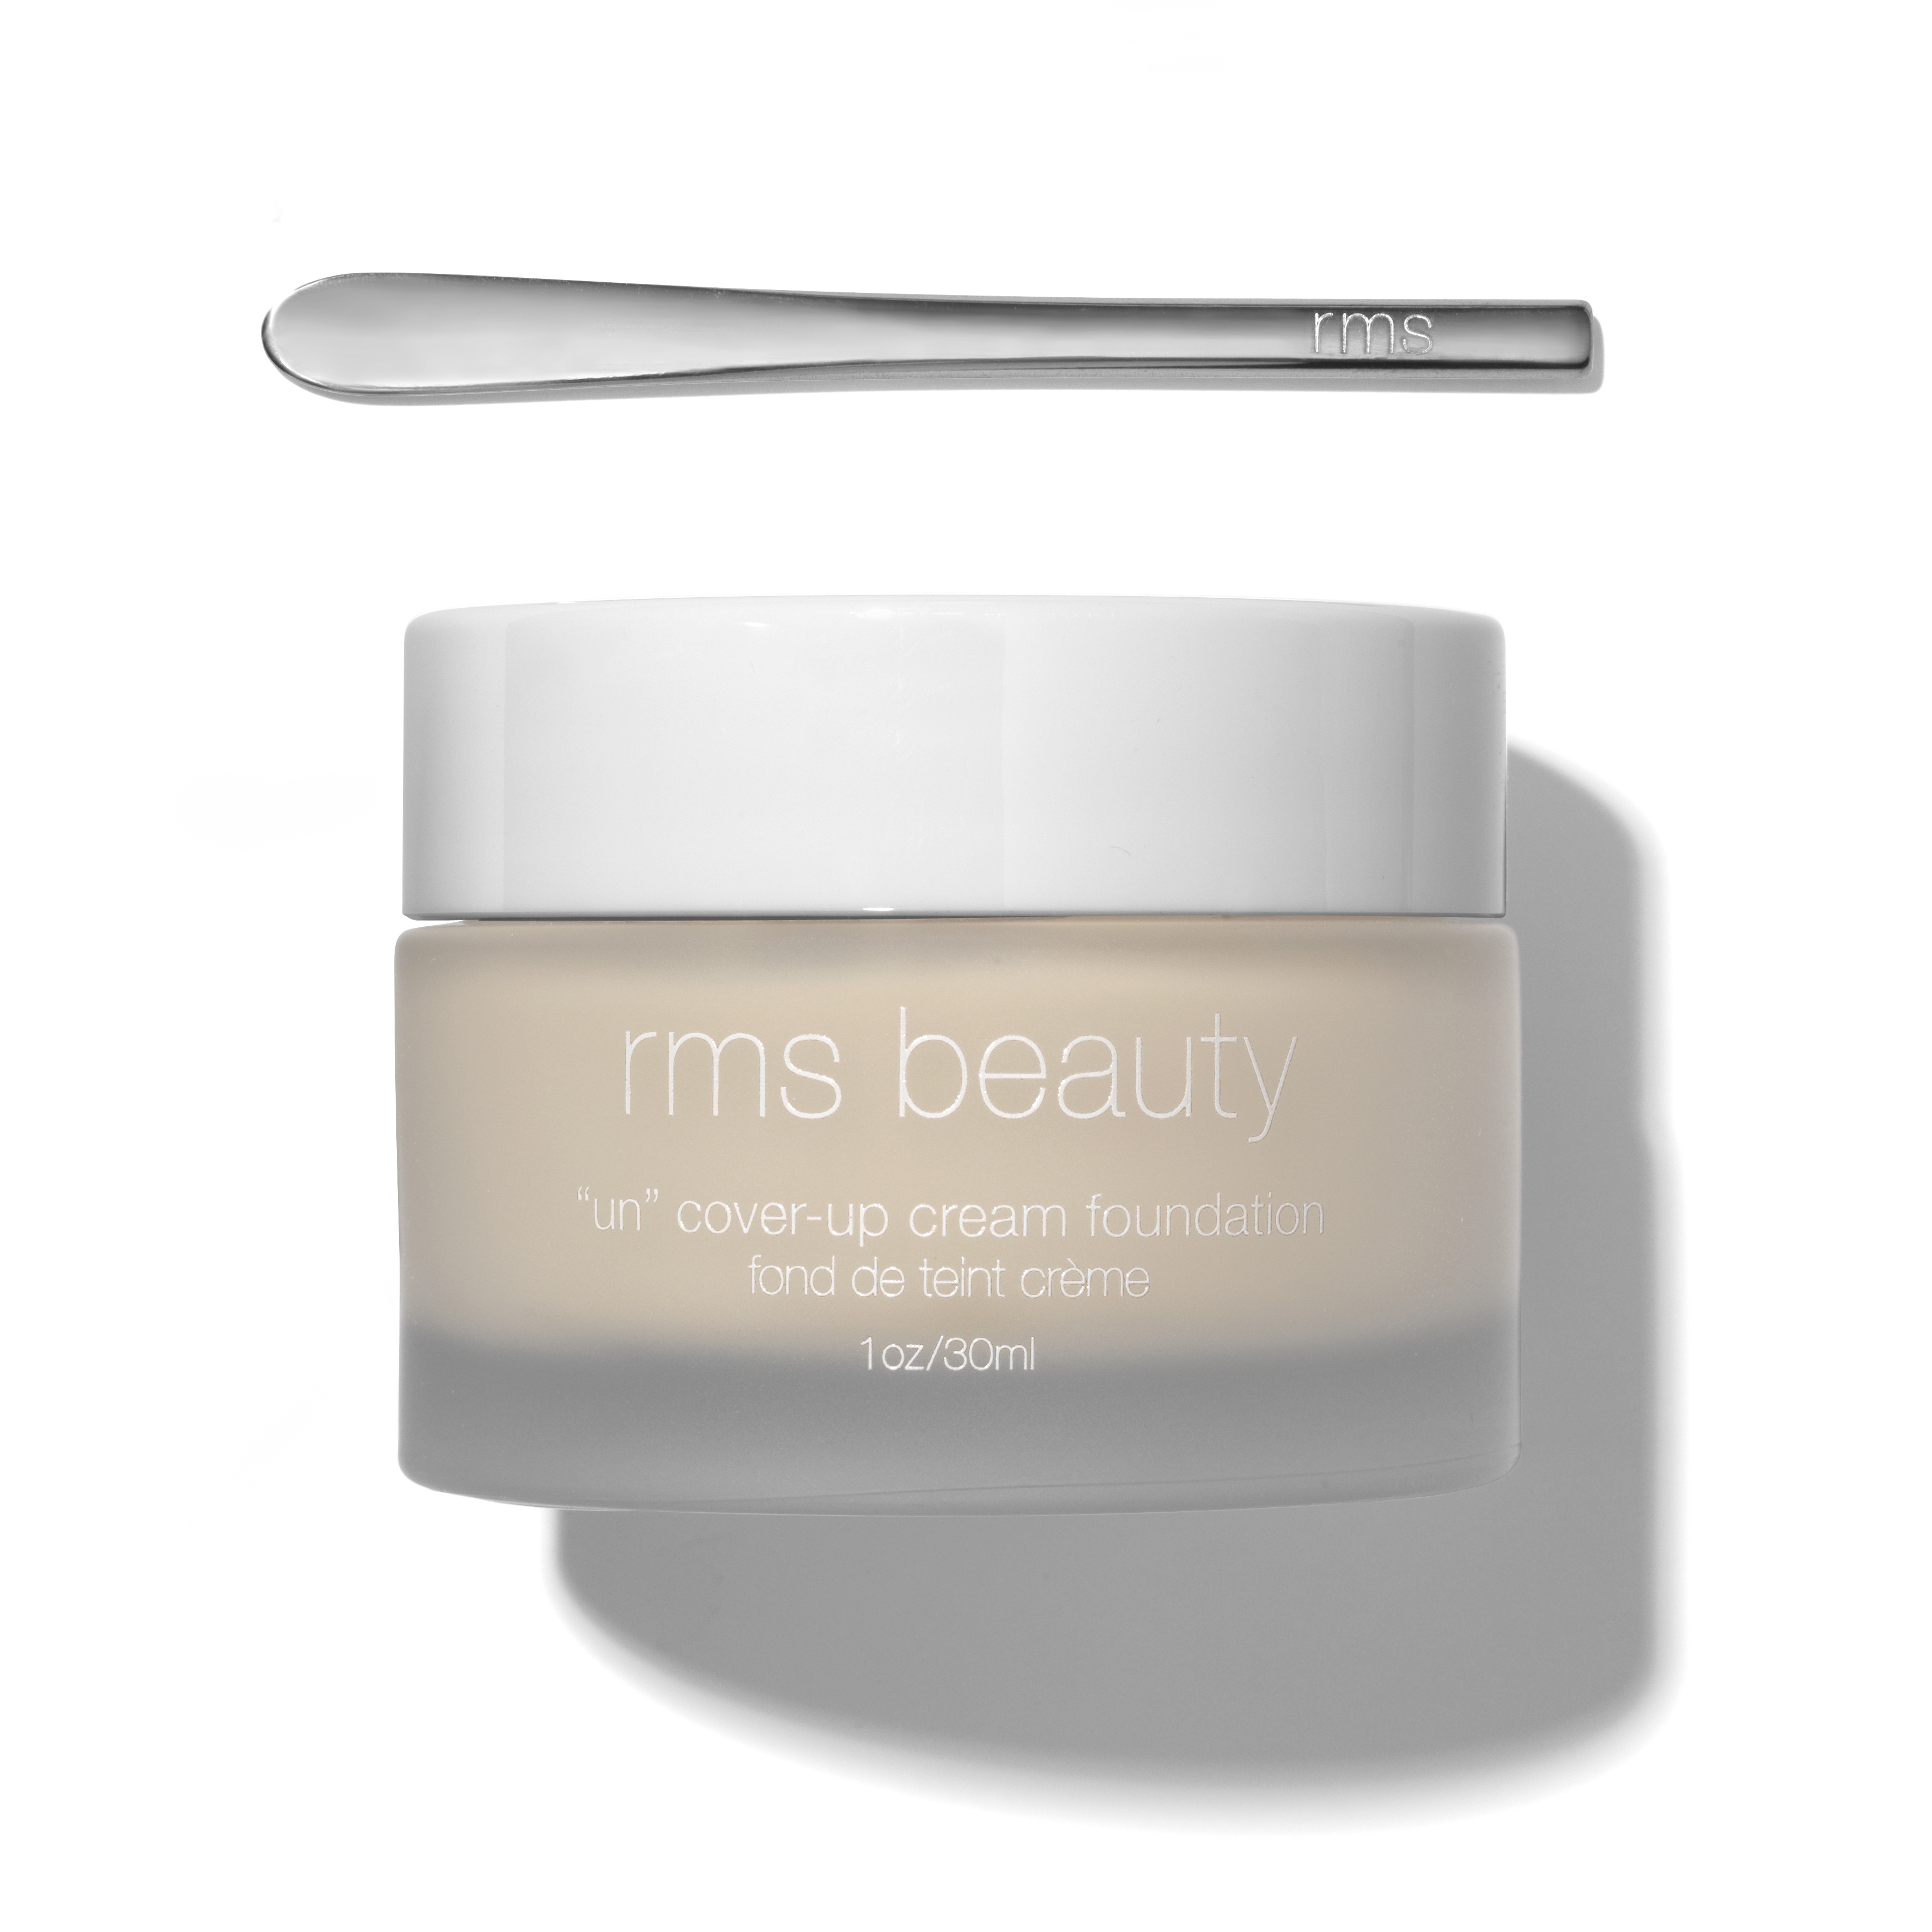 RMS Beauty Un Cover-up Cream Foundation | Space NK